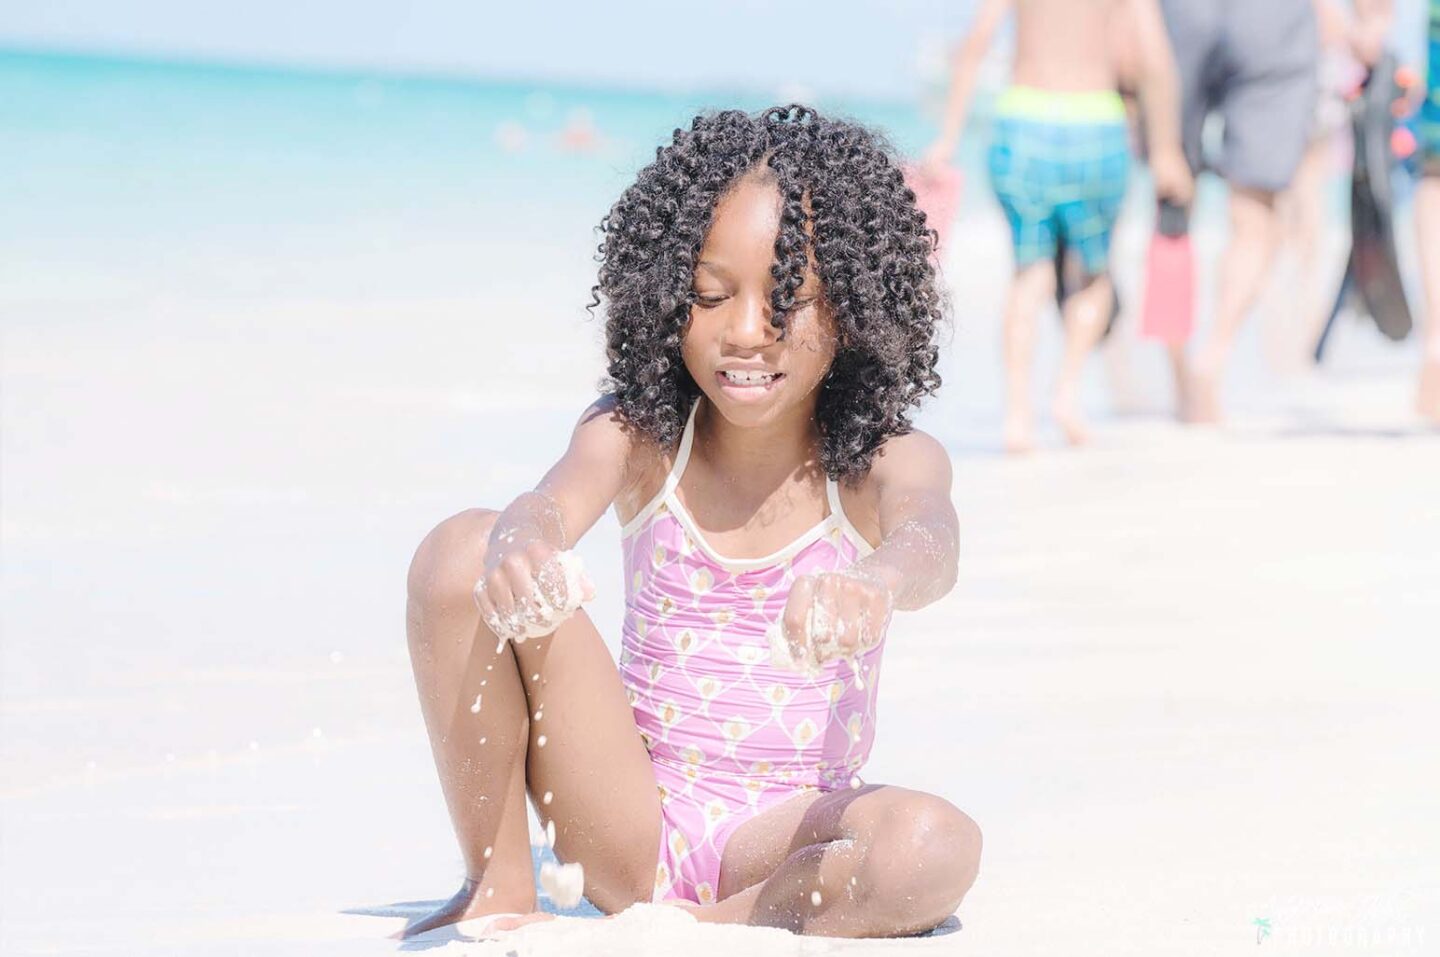 Activities to Do in the Caribbean With Kids